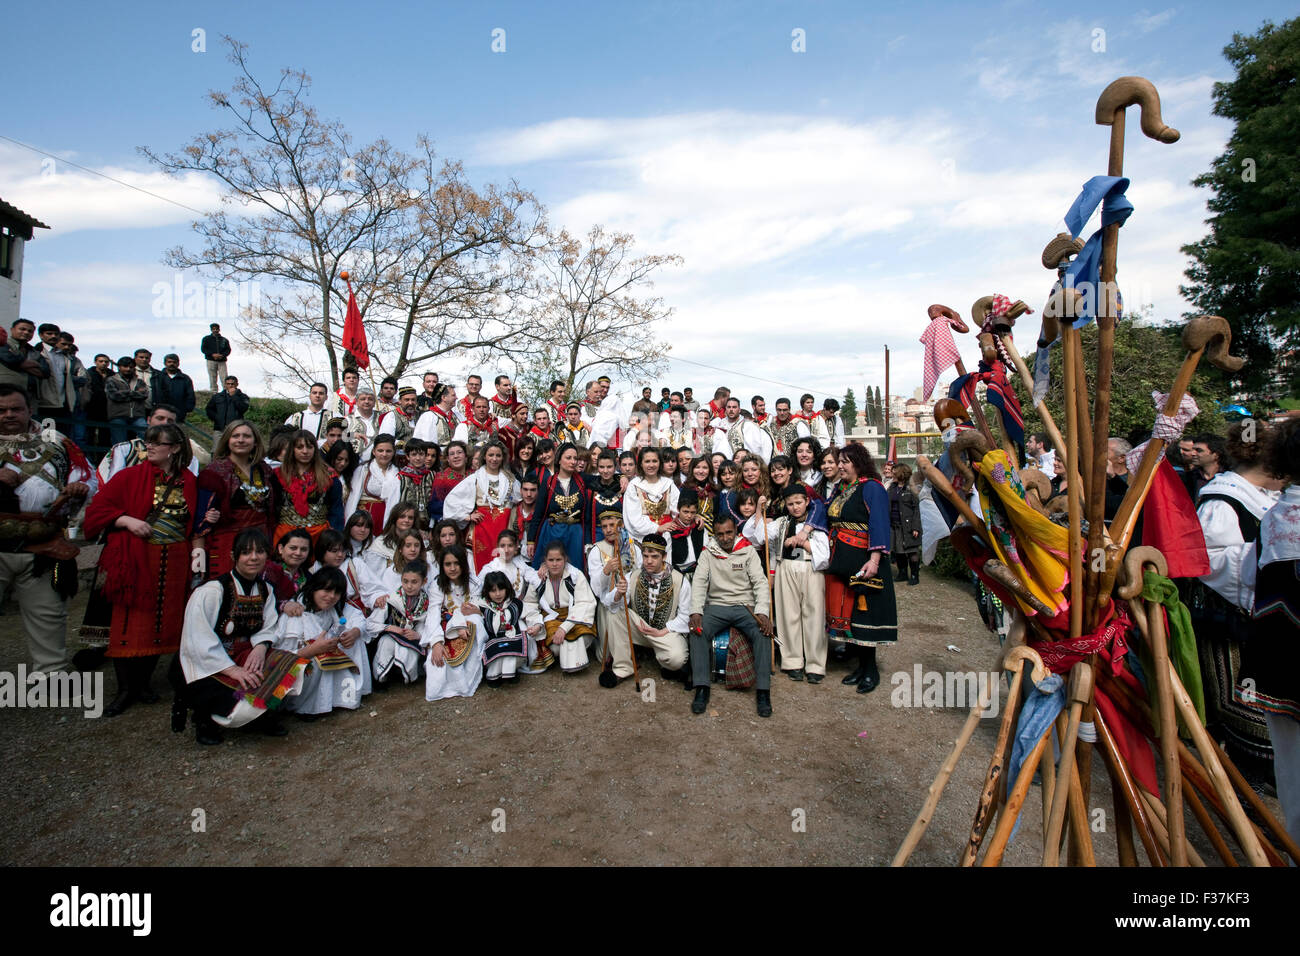 Group photo of Vlach Wedding performers of LAIOS cultural club union of Thebes and organ players with shepherd crooks at the end of annual ritual. GR Stock Photo